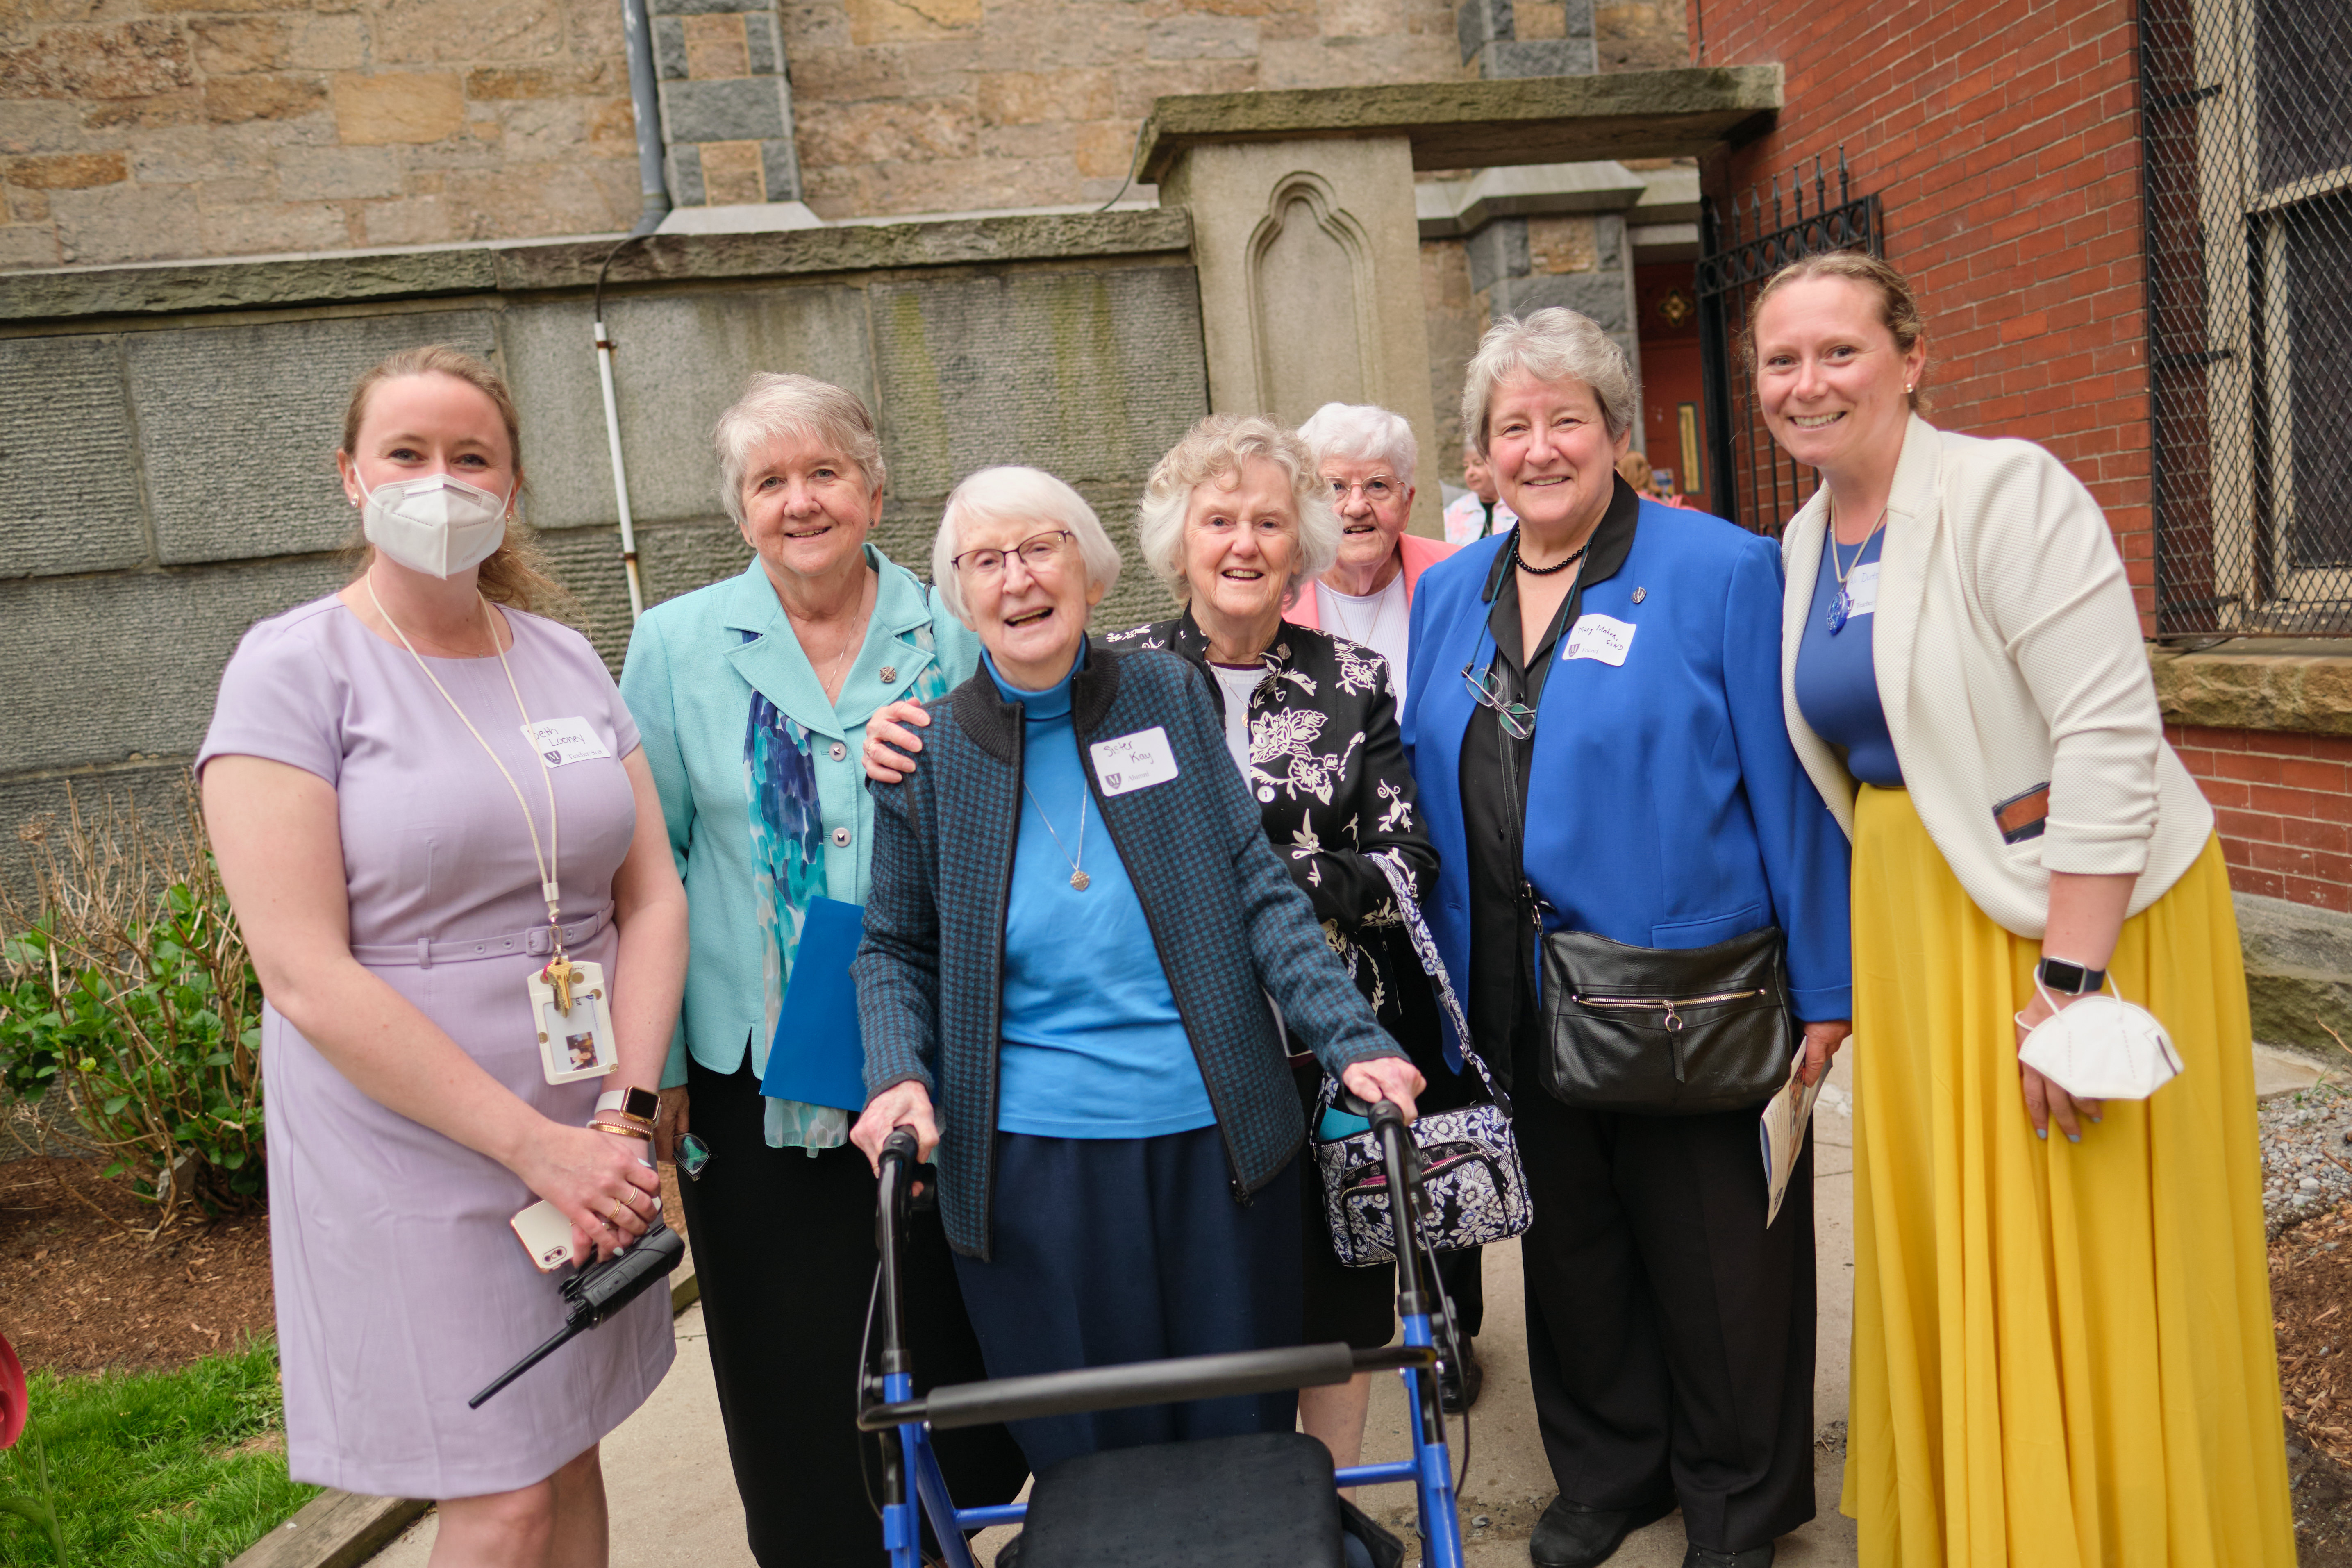 Some Sisters from her community joined Sister Pat and the Mission Grammar staff for the celebration. Sister Donna was unable to 